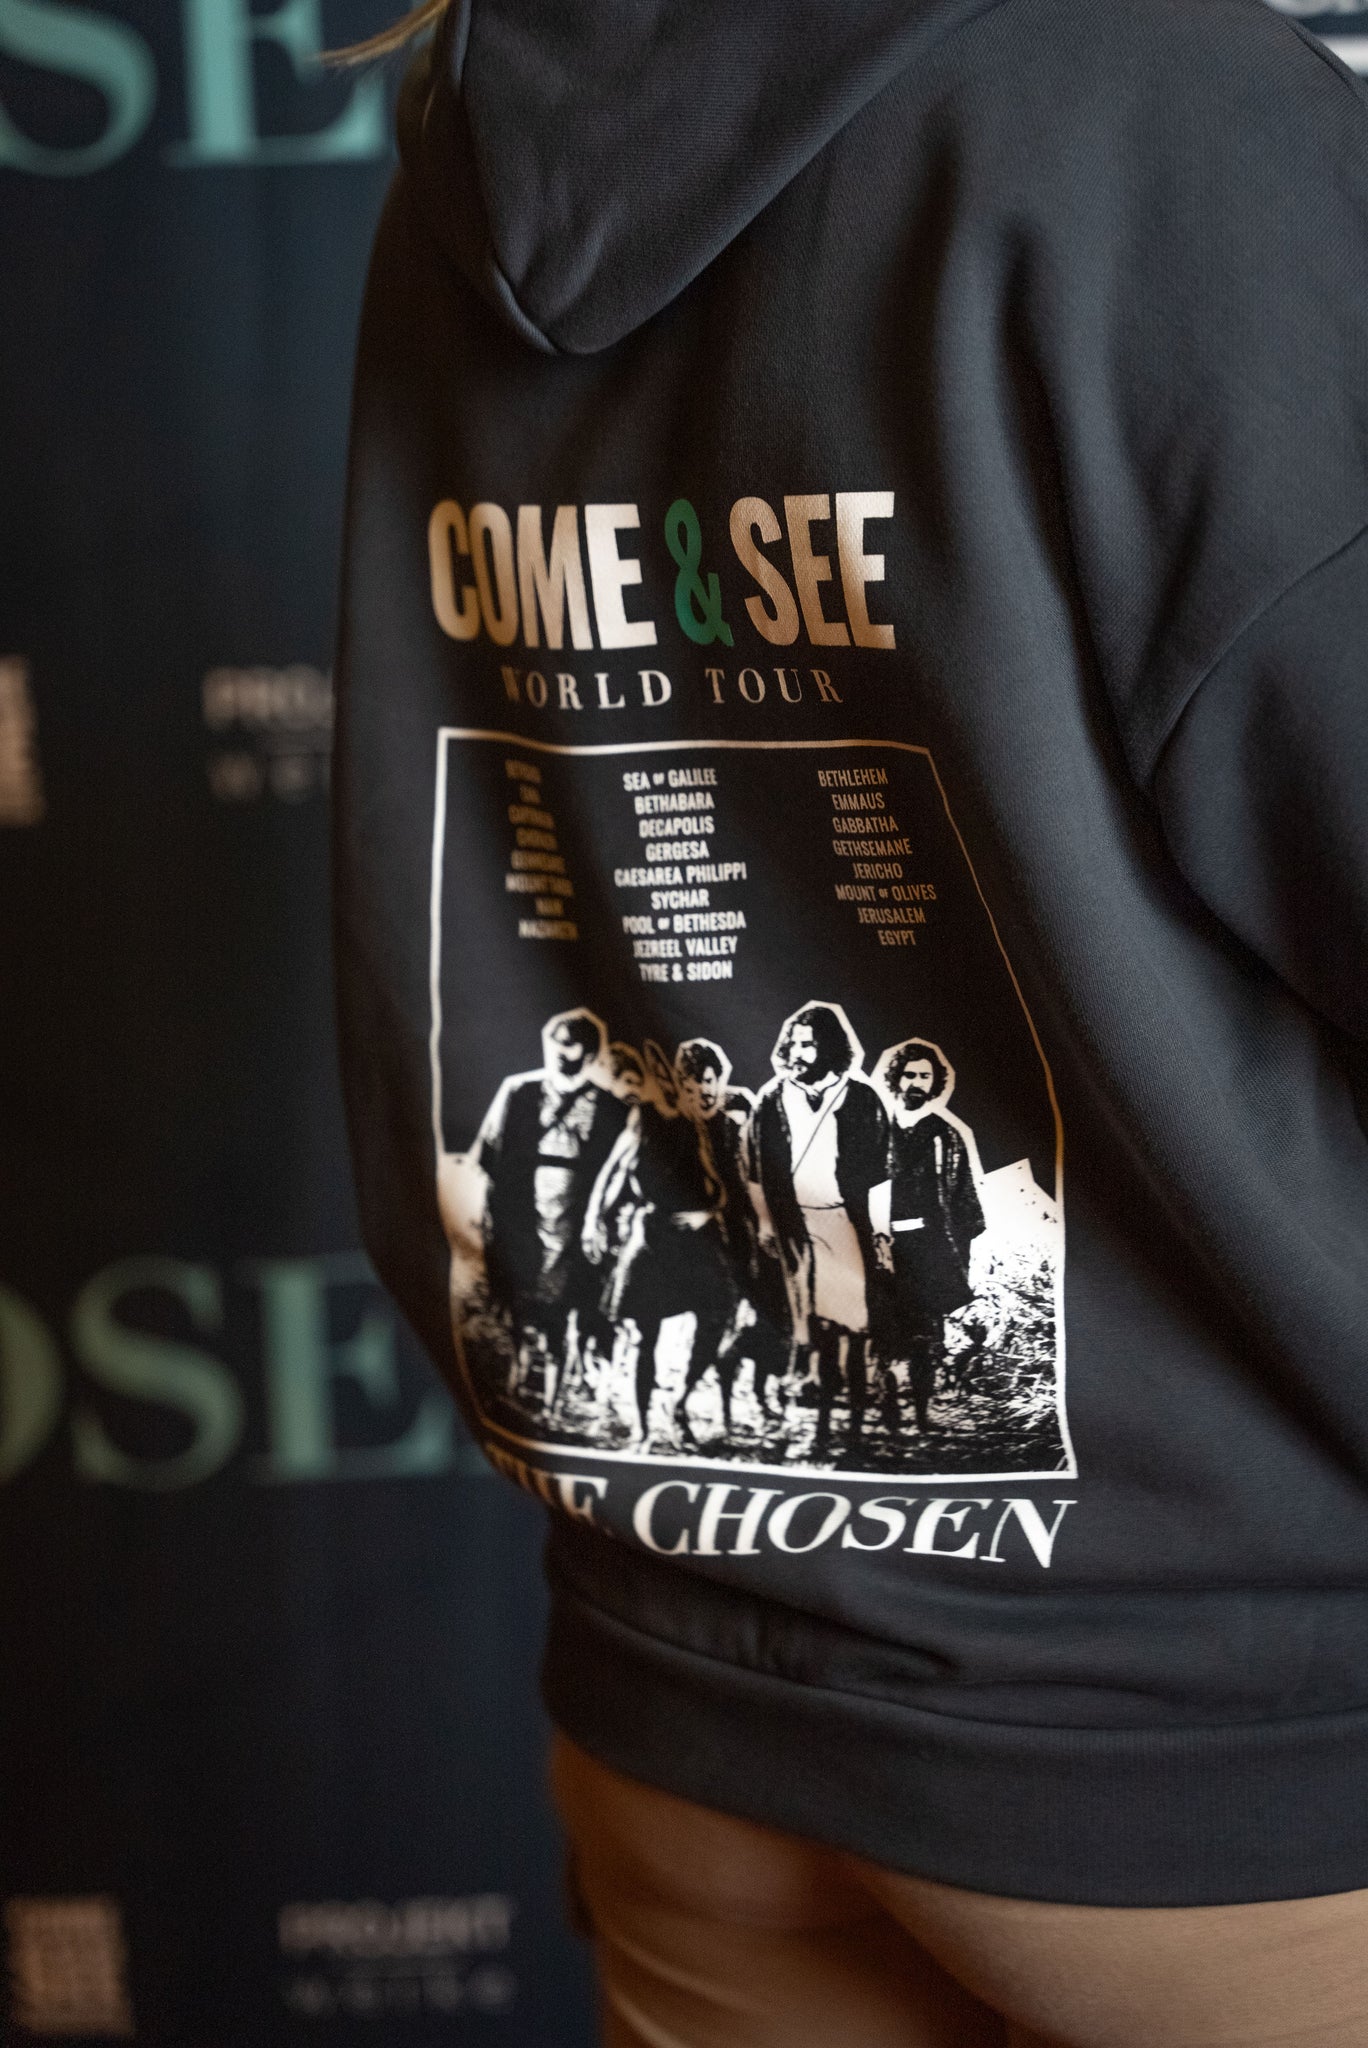 The Chosen | Come and see World Tour Hoodie